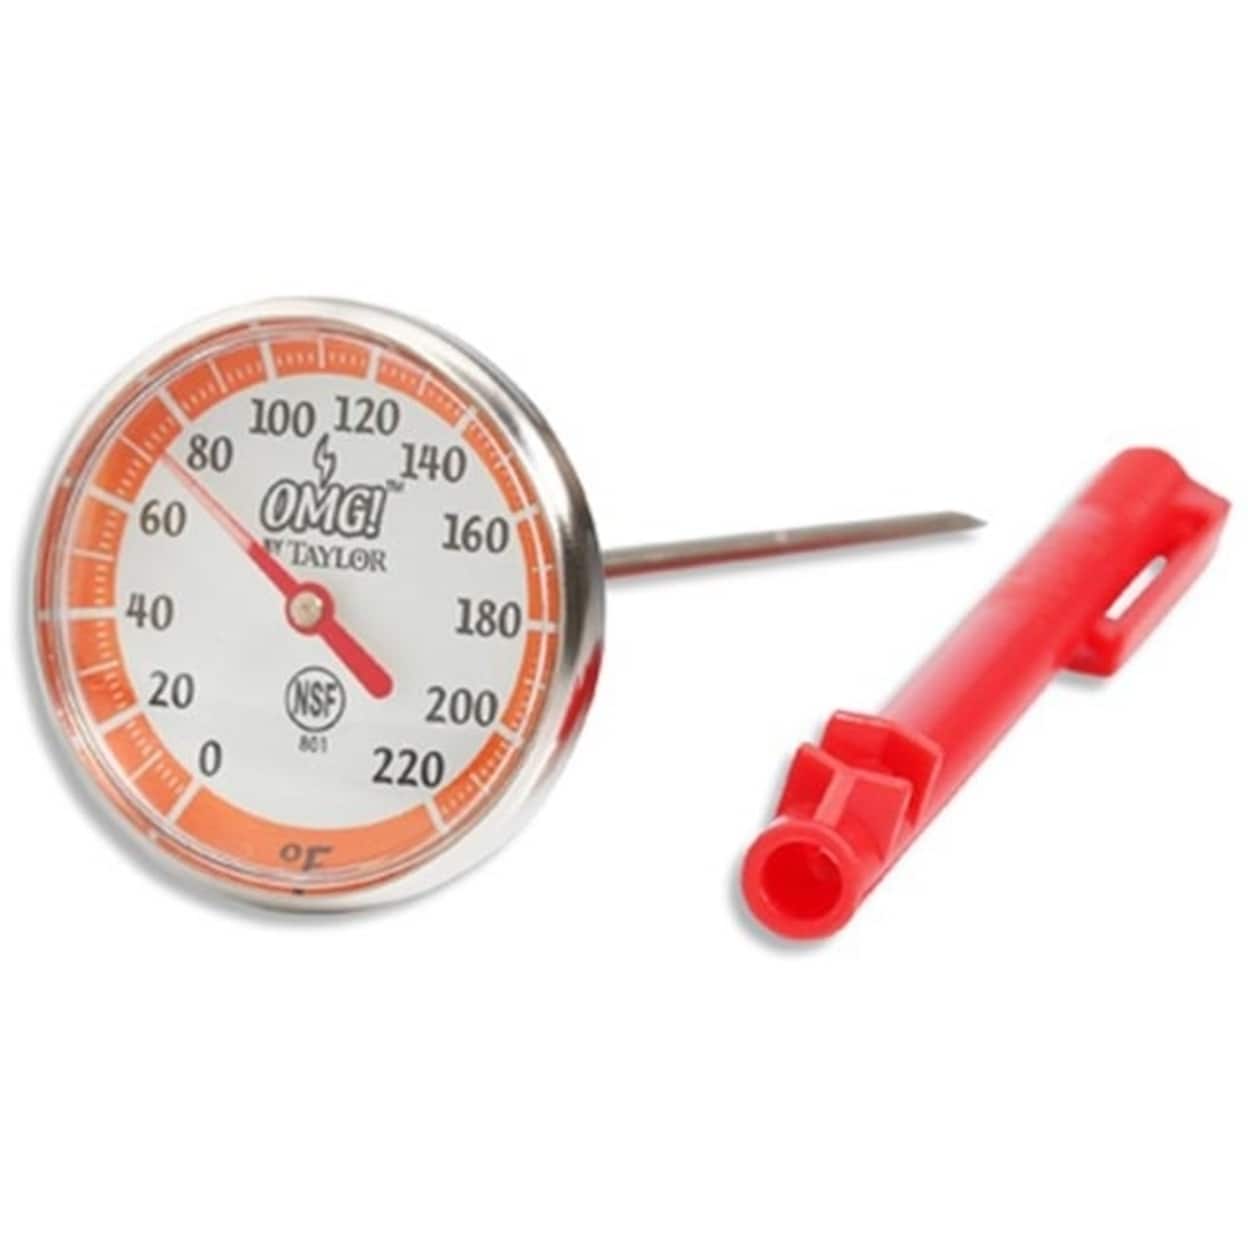 https://ak1.ostkcdn.com/images/products/is/images/direct/d2c1463e5e39754c483a8ec6e6863b0fae7a9156/Taylor-801Omg-Instant-Read-Thermometer.jpg